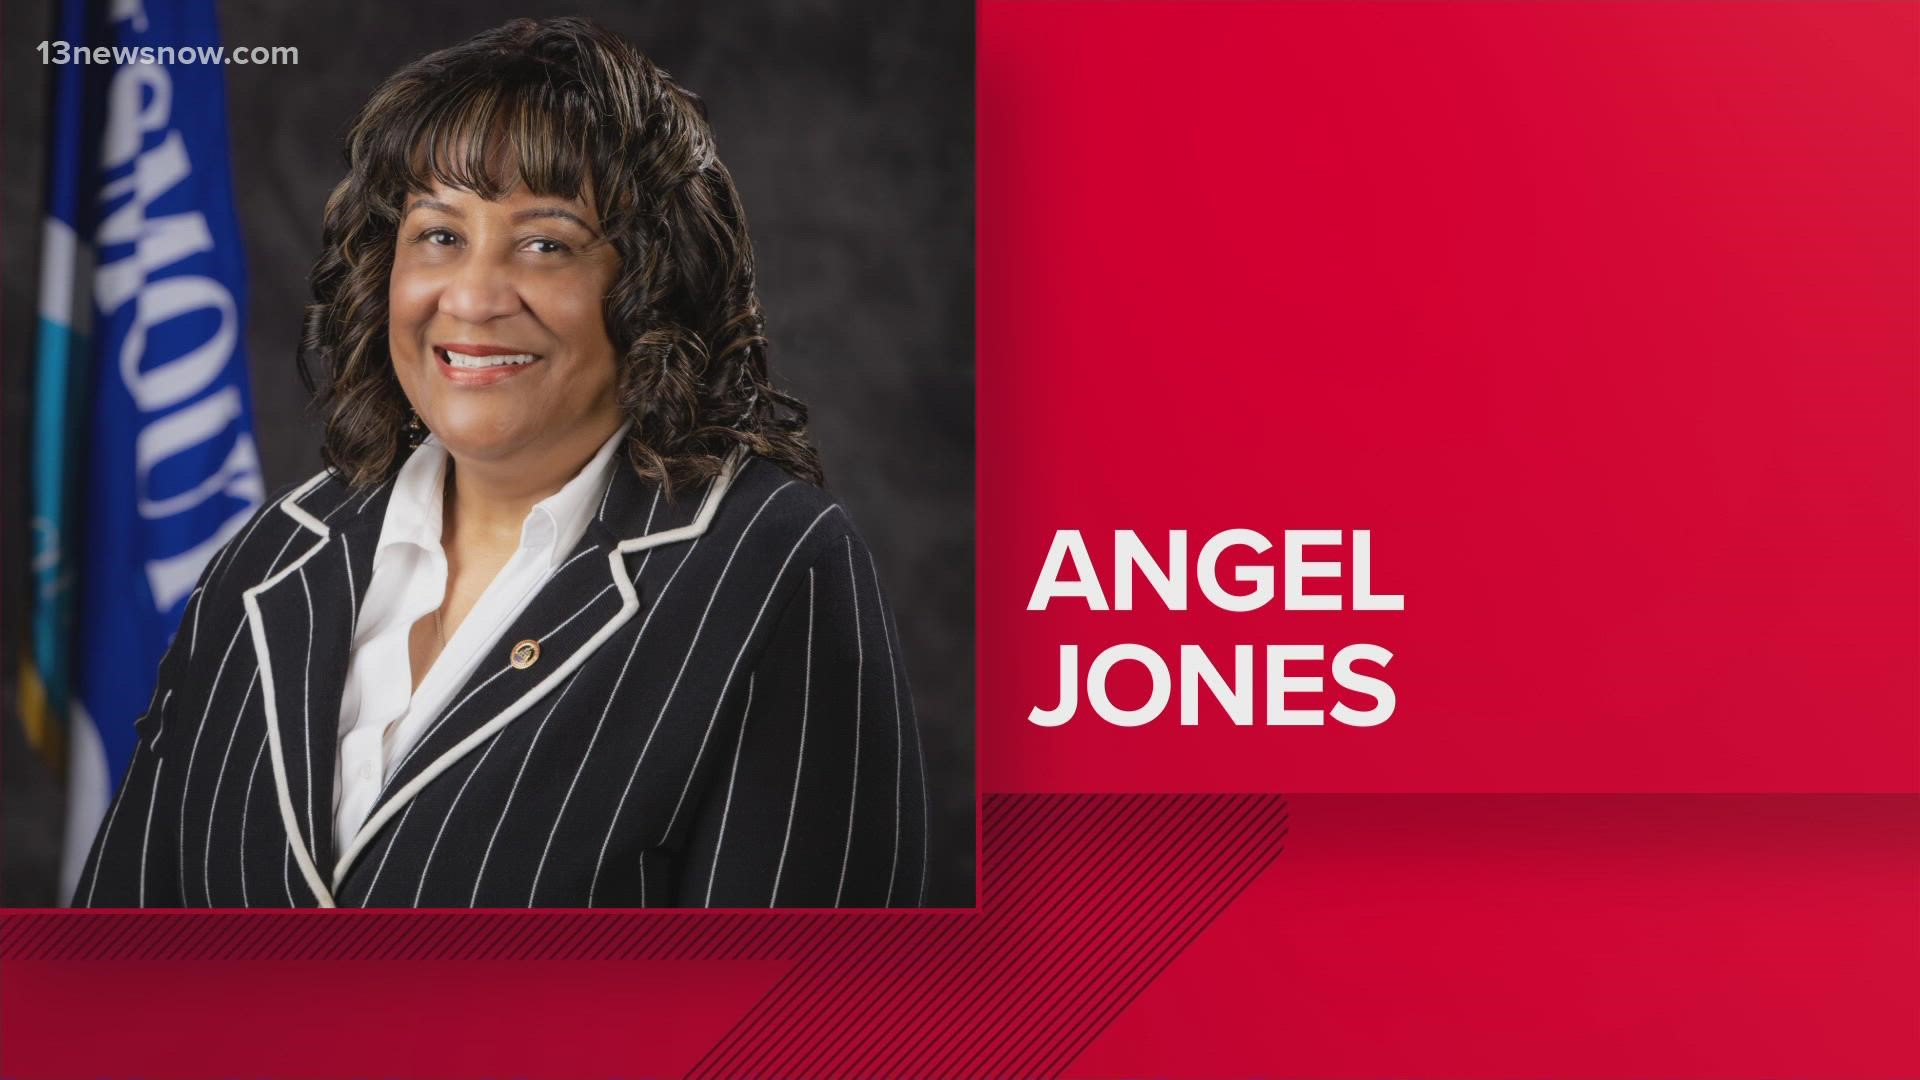 According to Councilman Bill Moody, the Portsmouth City Council voted 4-3 to fire City Manager Angel Jones.